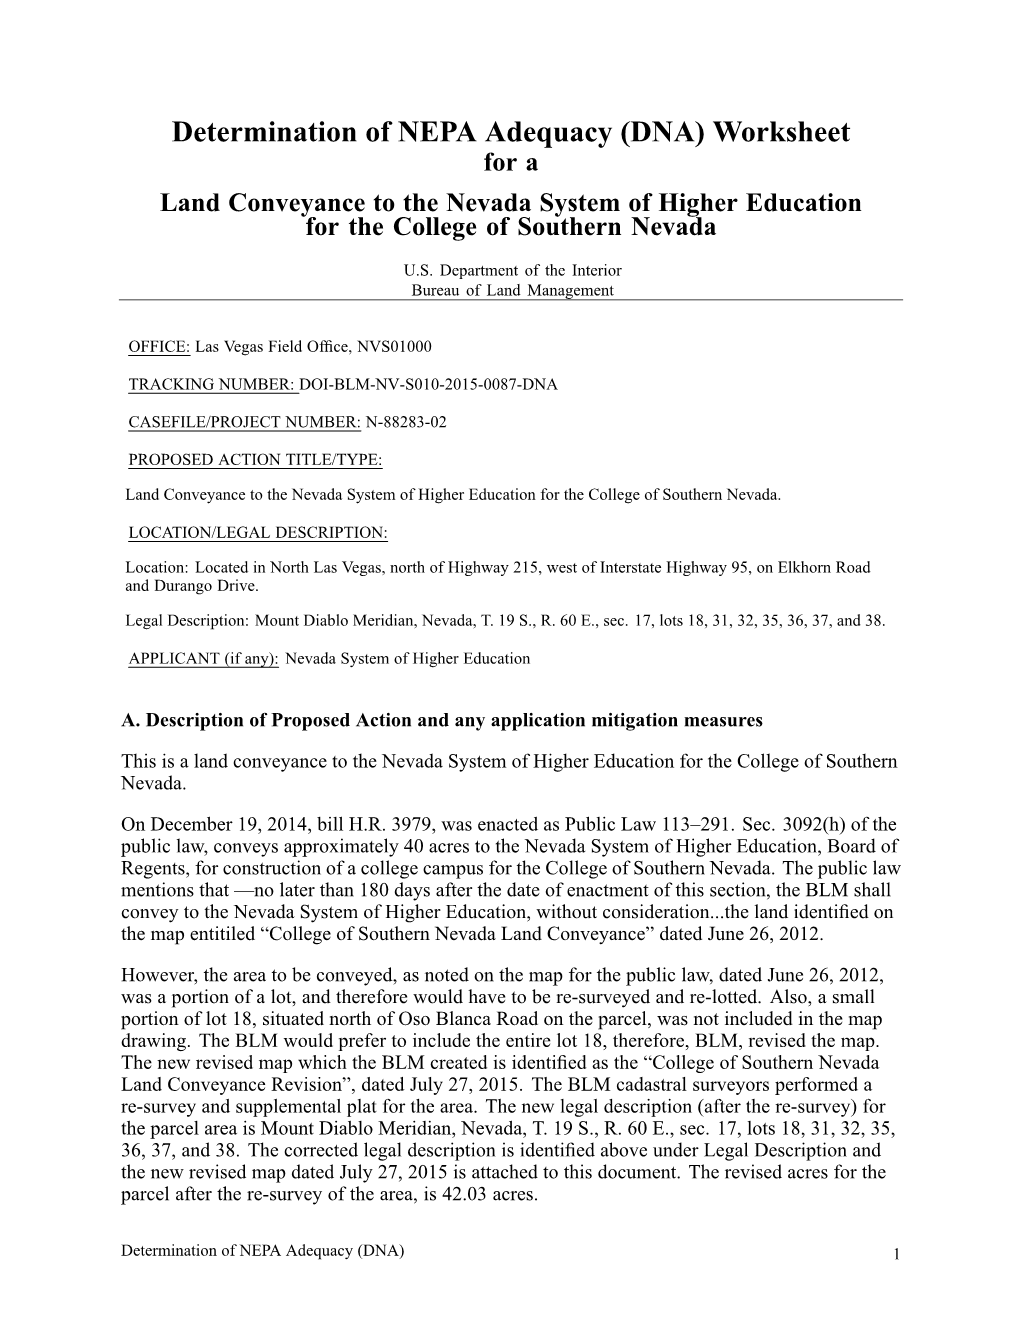 Determination of NEPA Adequacy (DNA) Worksheet for a Land Conveyance to the Nevada System of Higher Education for the College of Southern Nevada